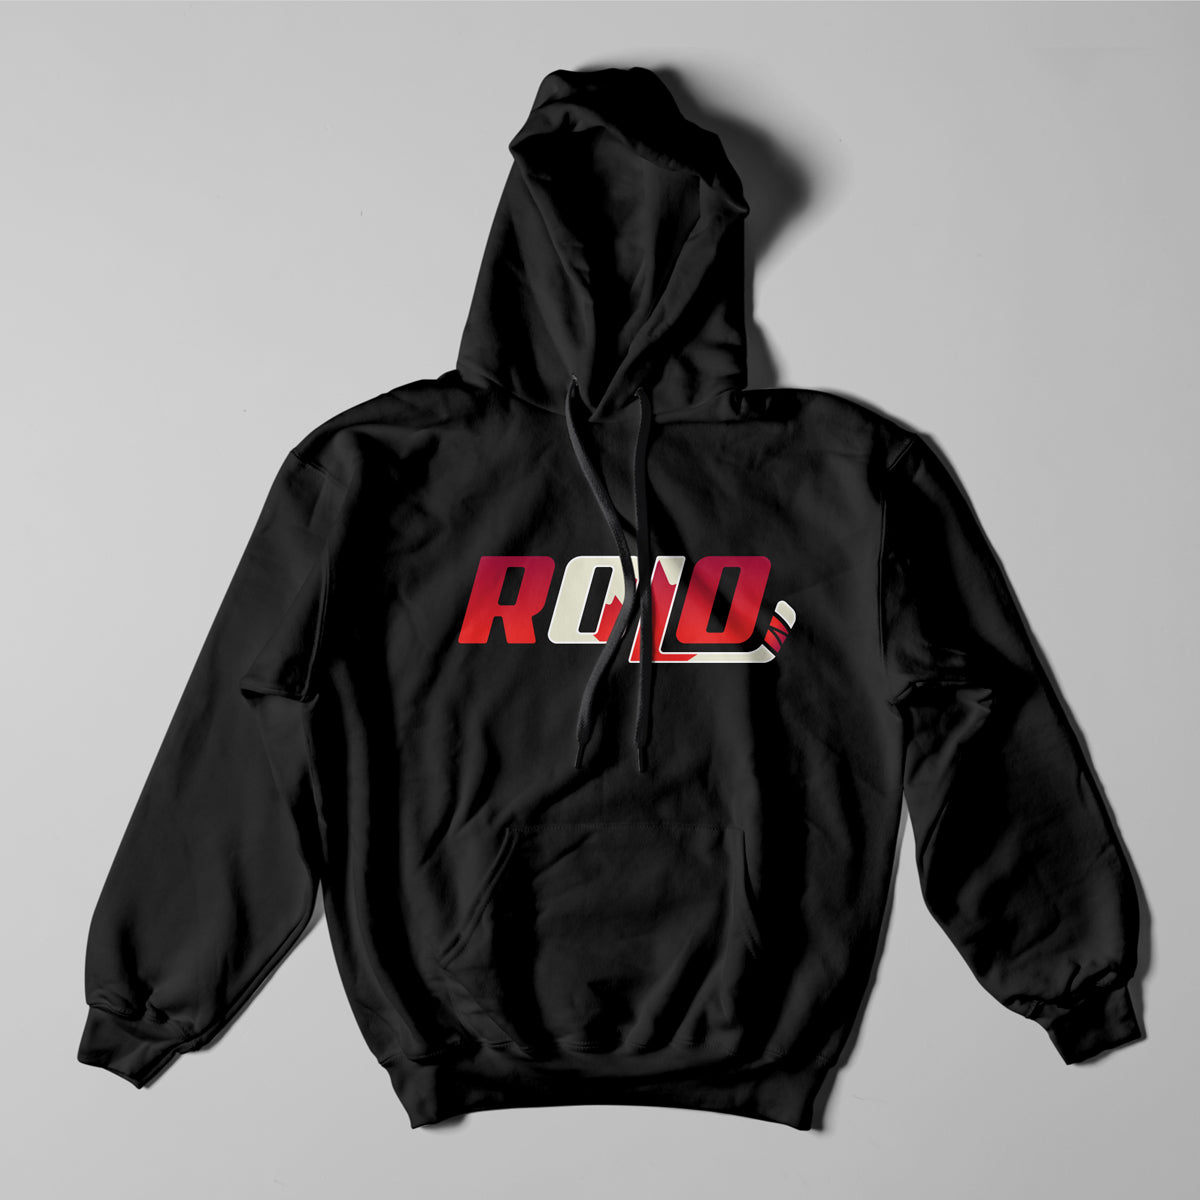 Rolo - Heavyweight Pullover Hoodie Black_V2